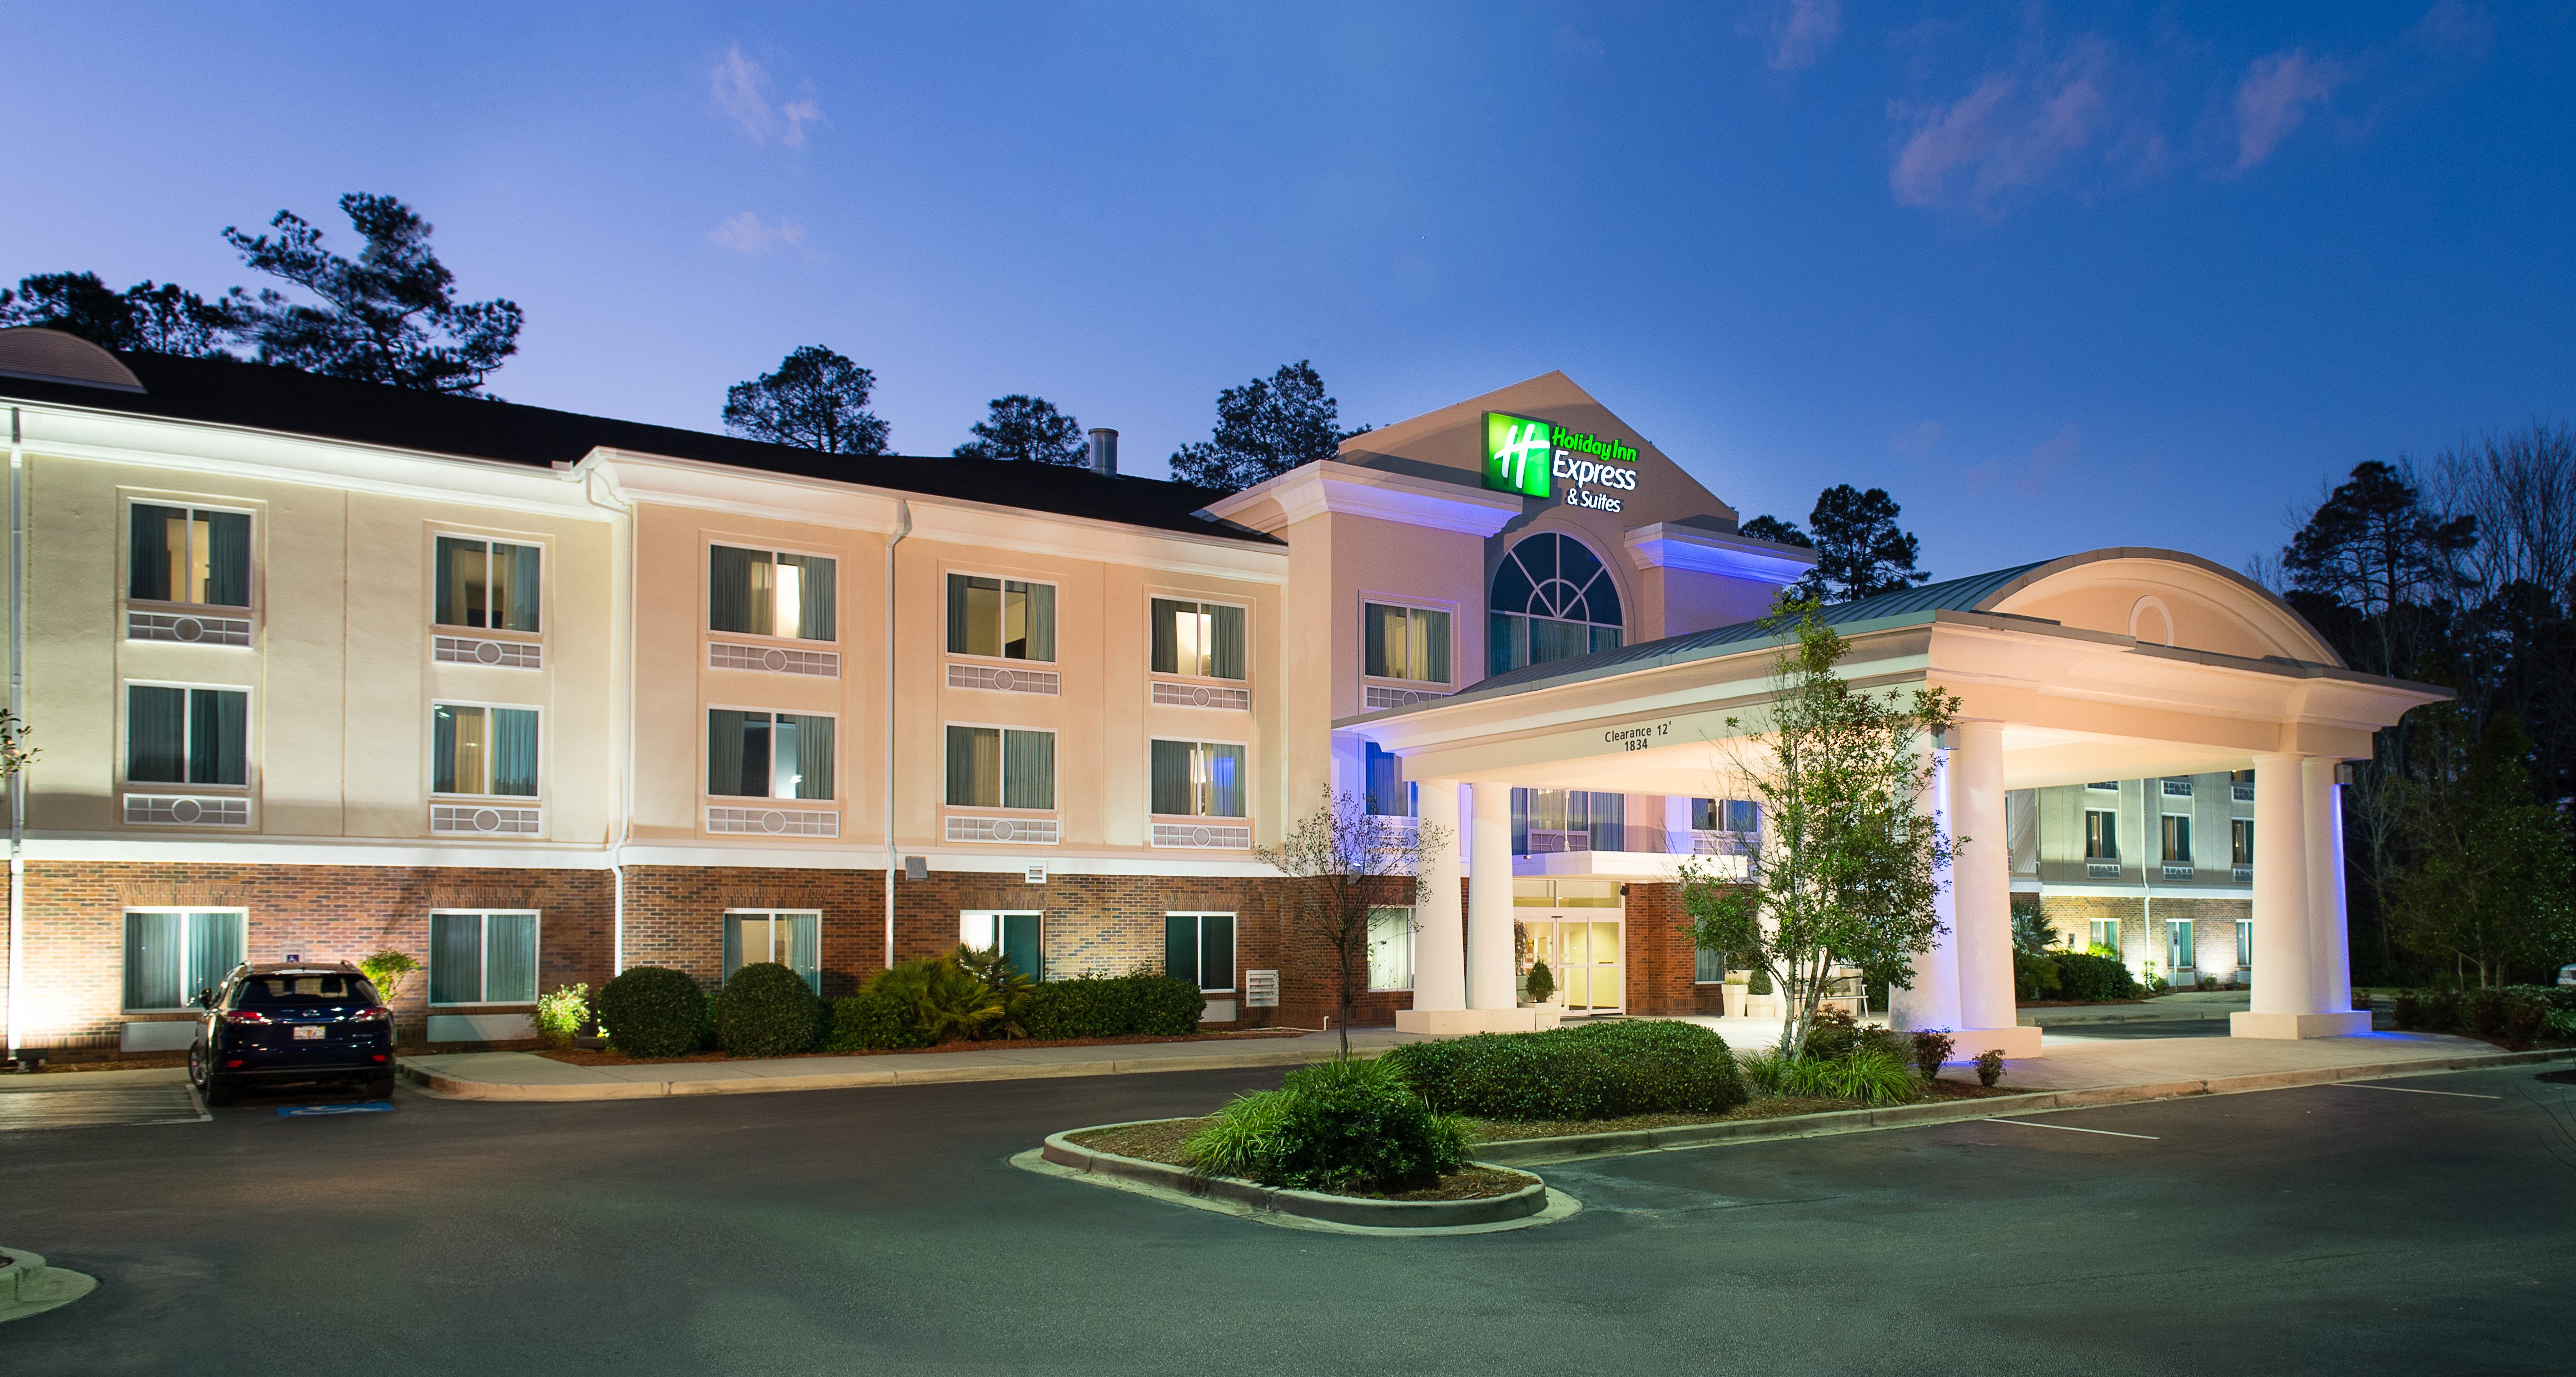 Welcome to the Holiday Inn Express & Suites Walterboro SC